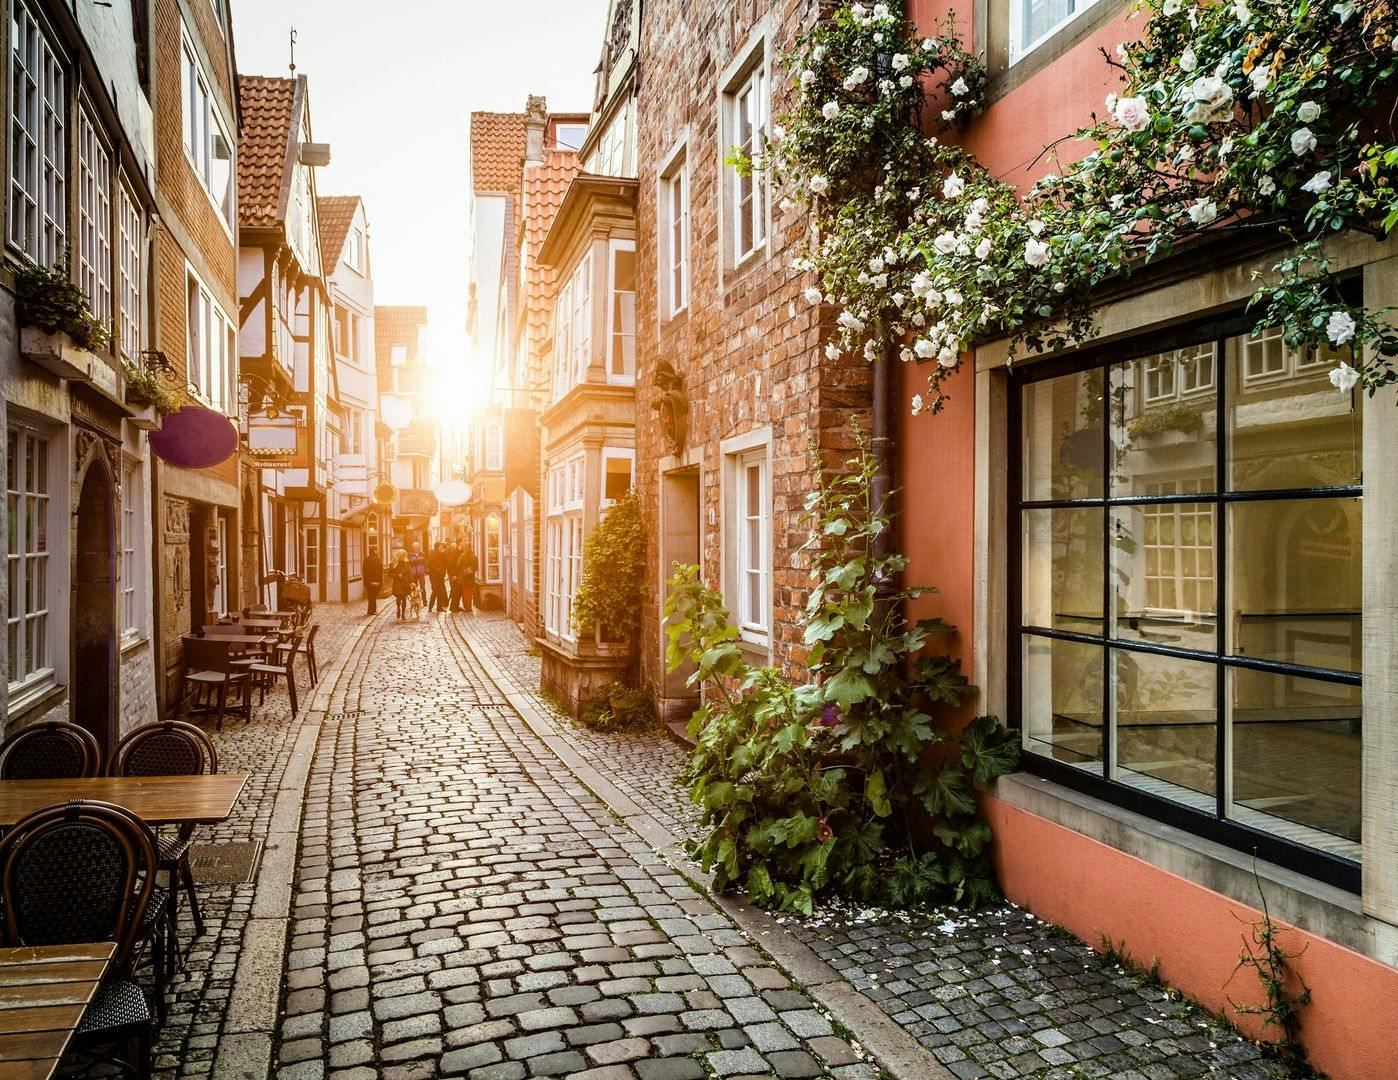 Self-guided audio tour through Bremen's old town